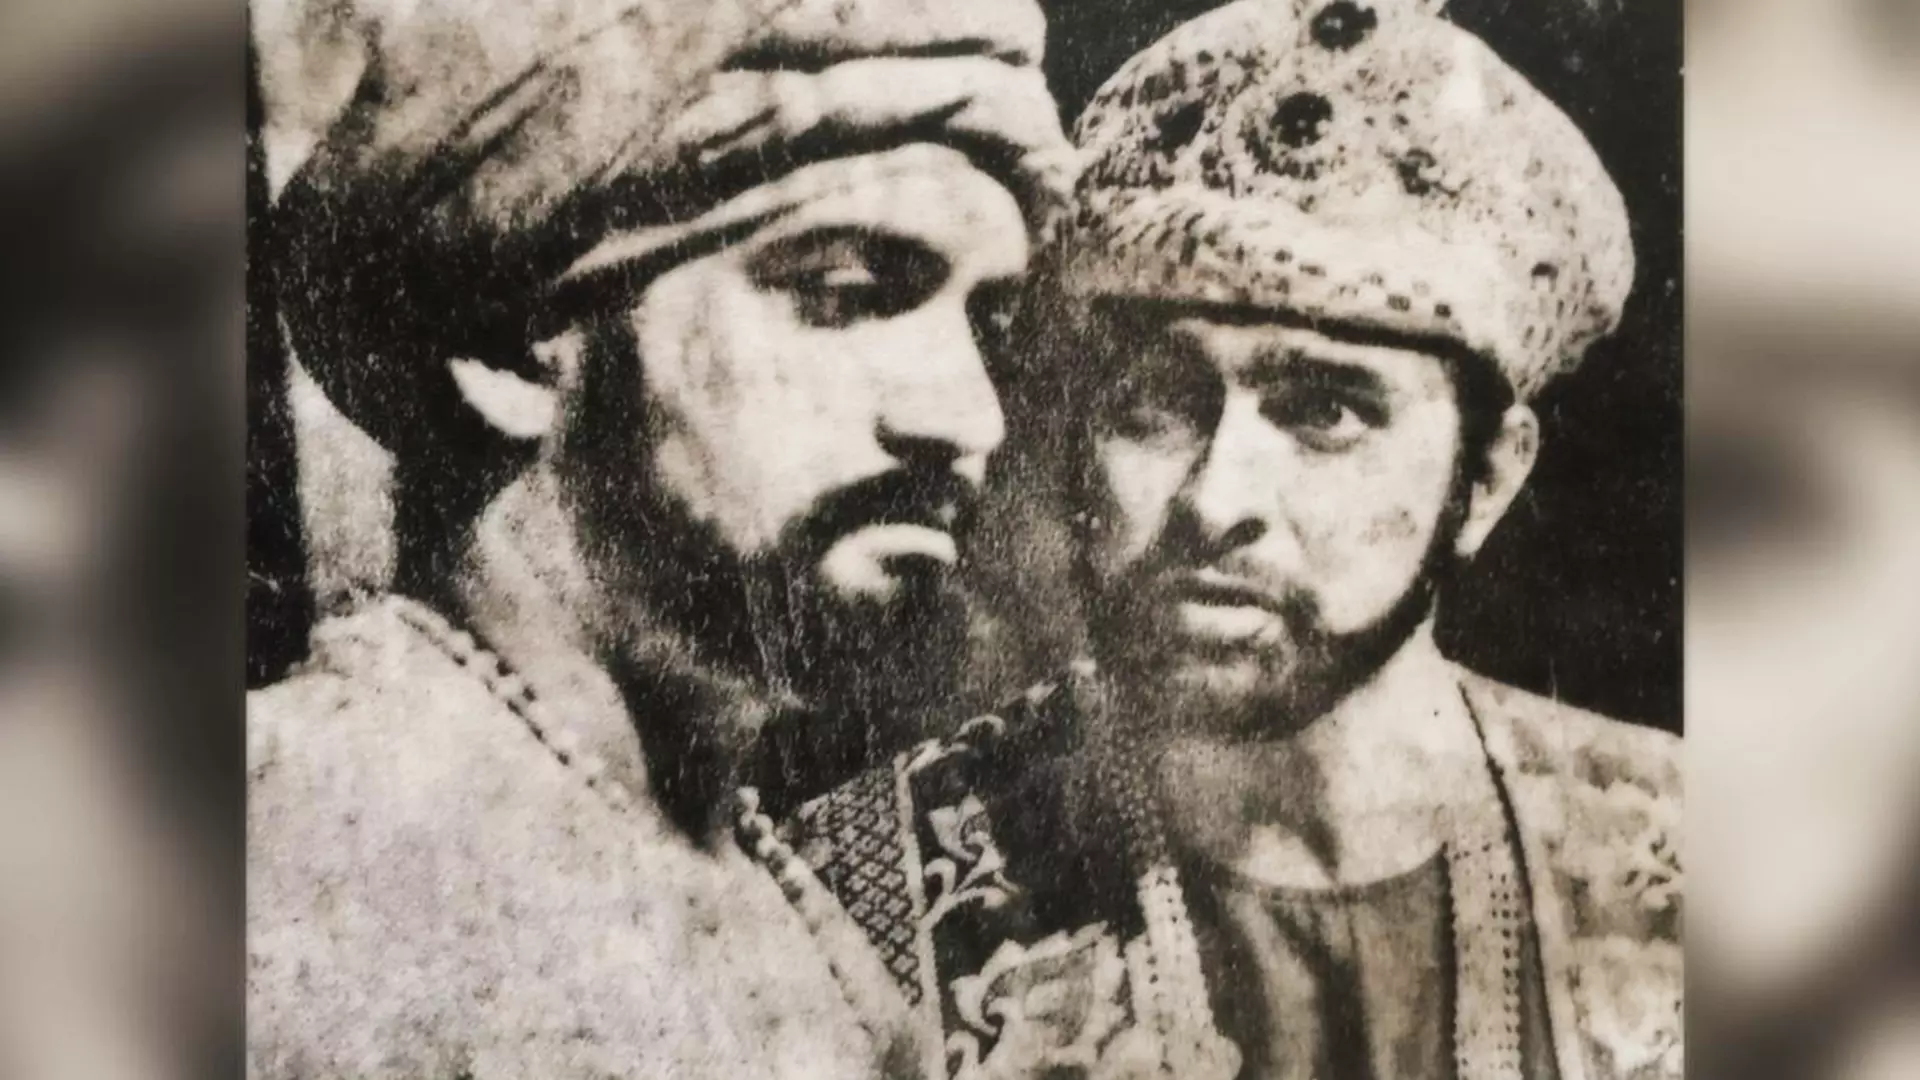 Actor Kabir Bedi as Tughlaq. Late Alyque Padamsee had asked Karnad to translate Tughlaq into English and staged the play with Kabir Bedi in the lead role.